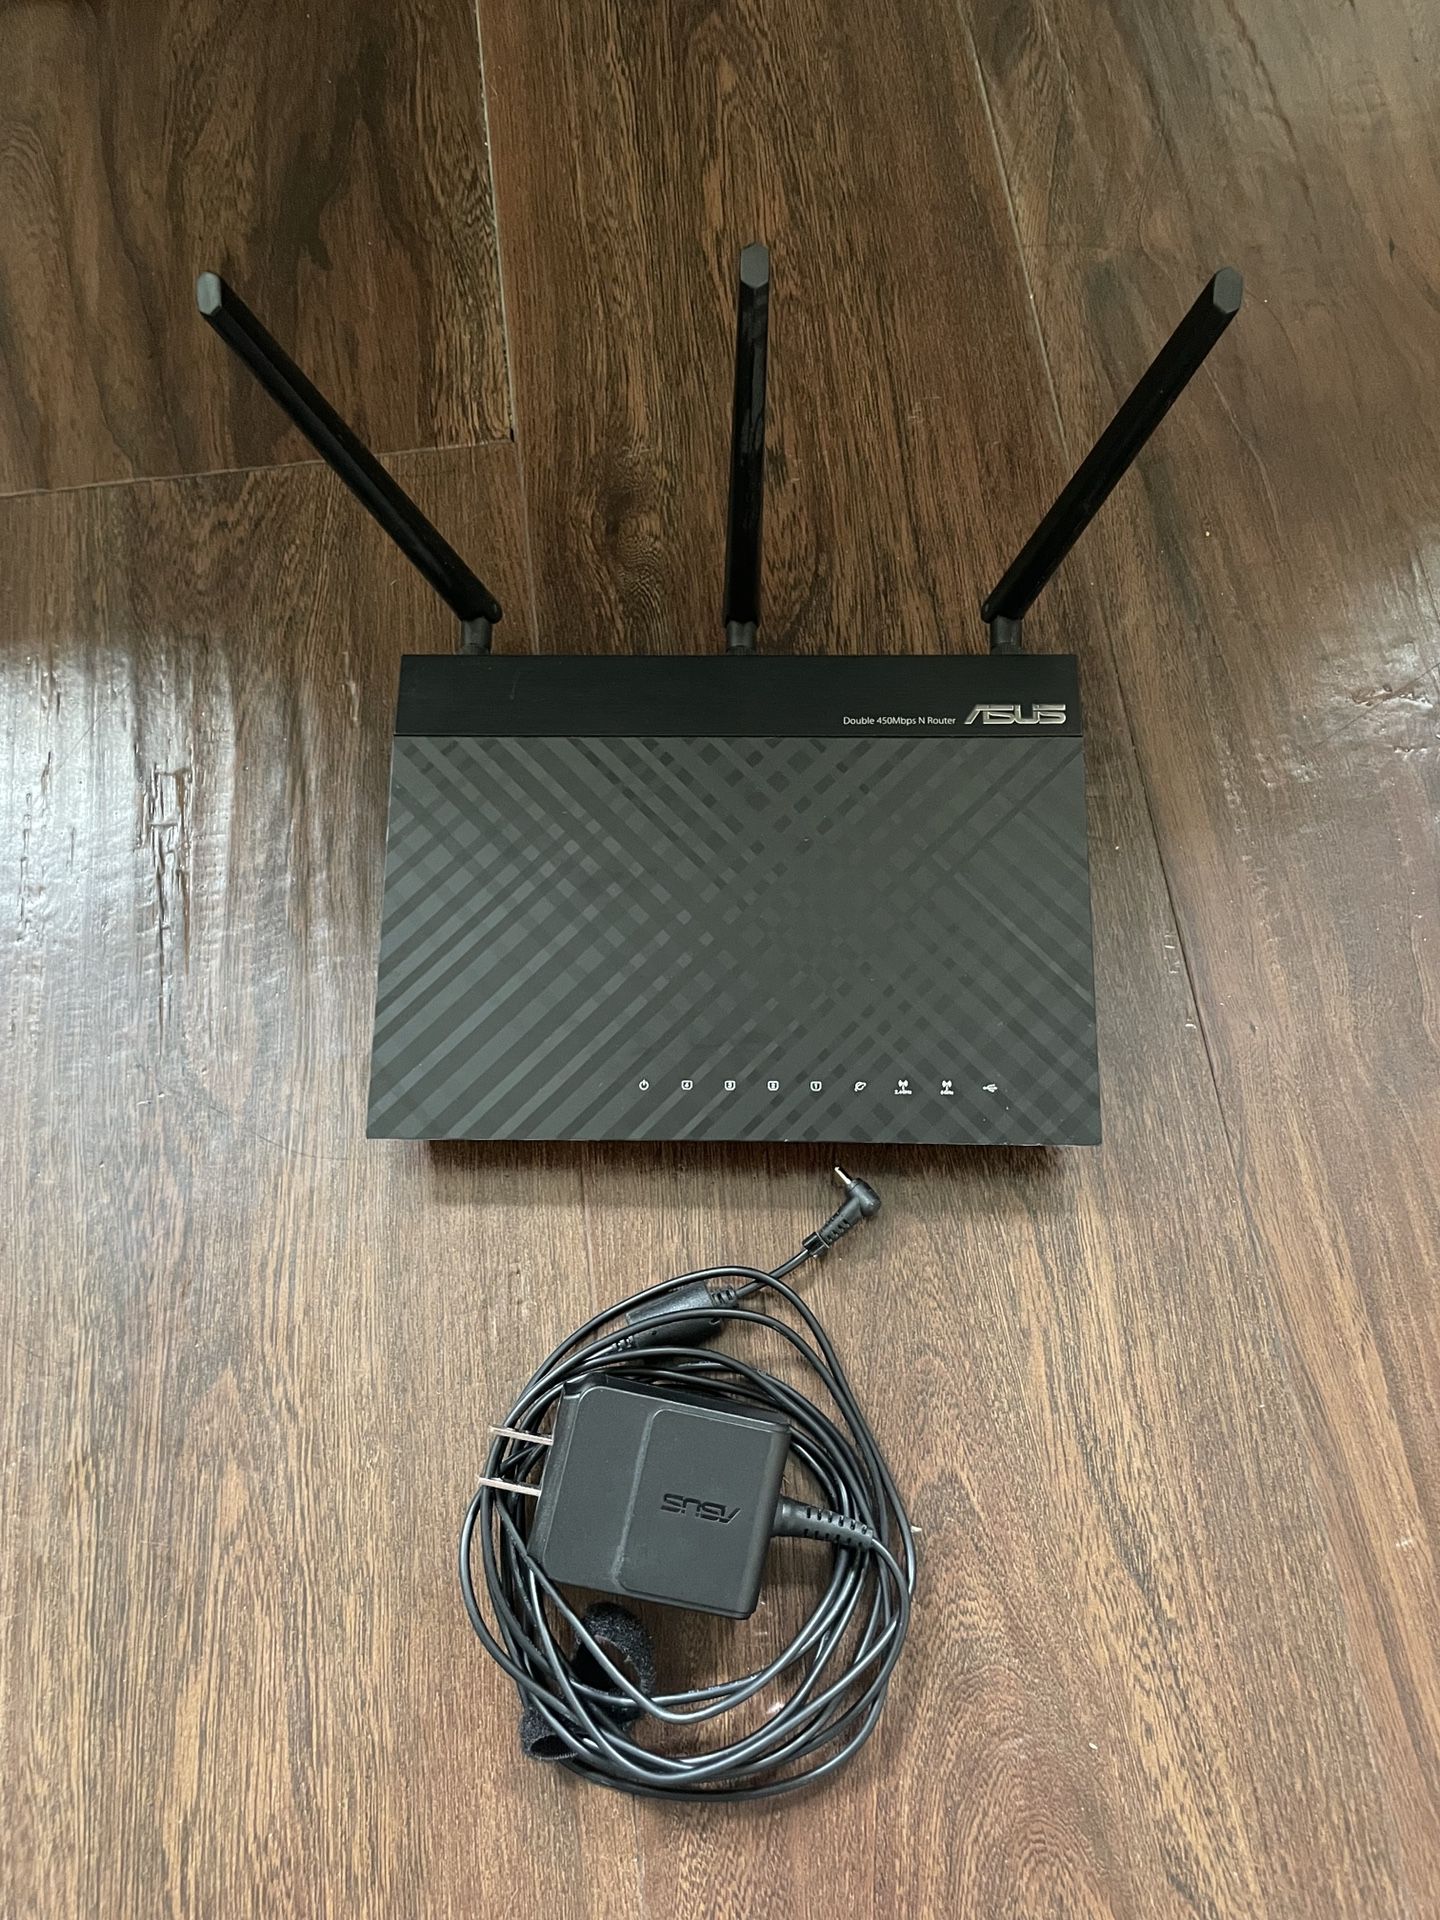 ASUS RT-N66R Double 450Mbps Dual Band Wireless N Router